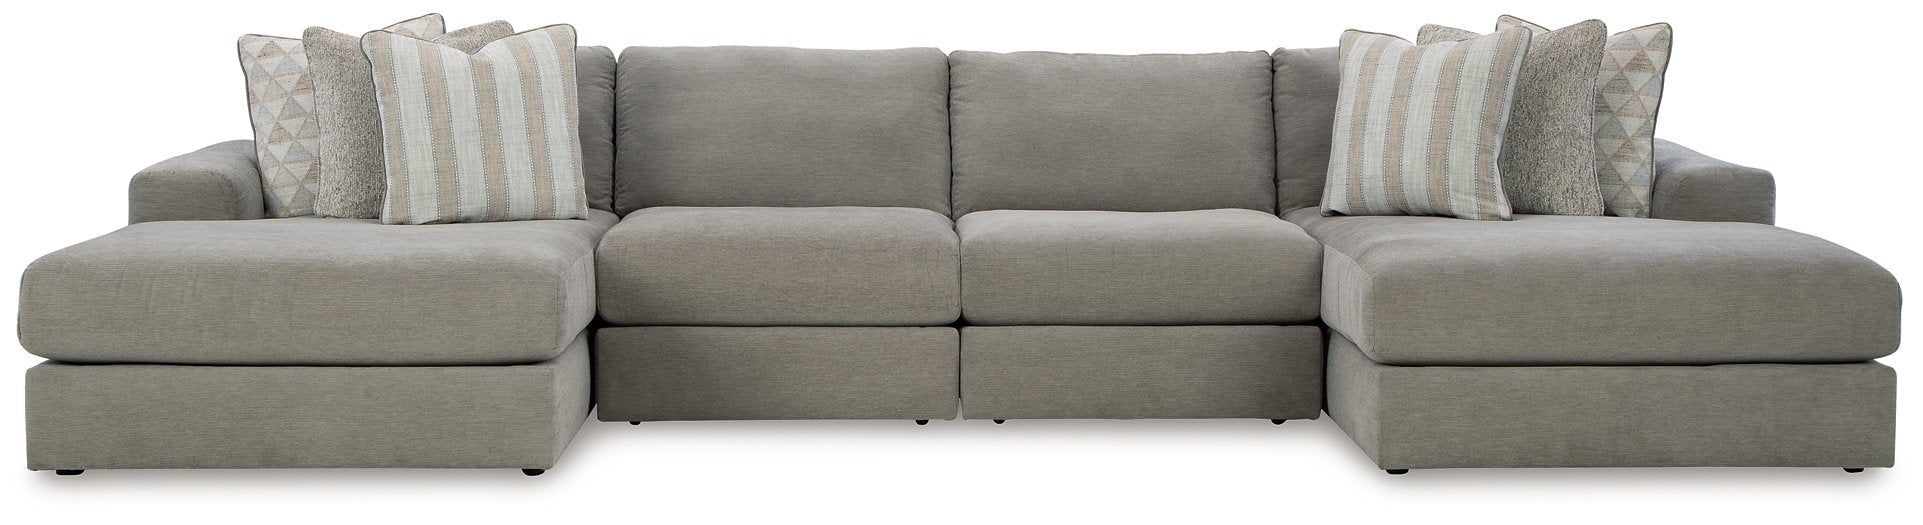 Avaliyah 4-Piece Double Chaise Sectional image